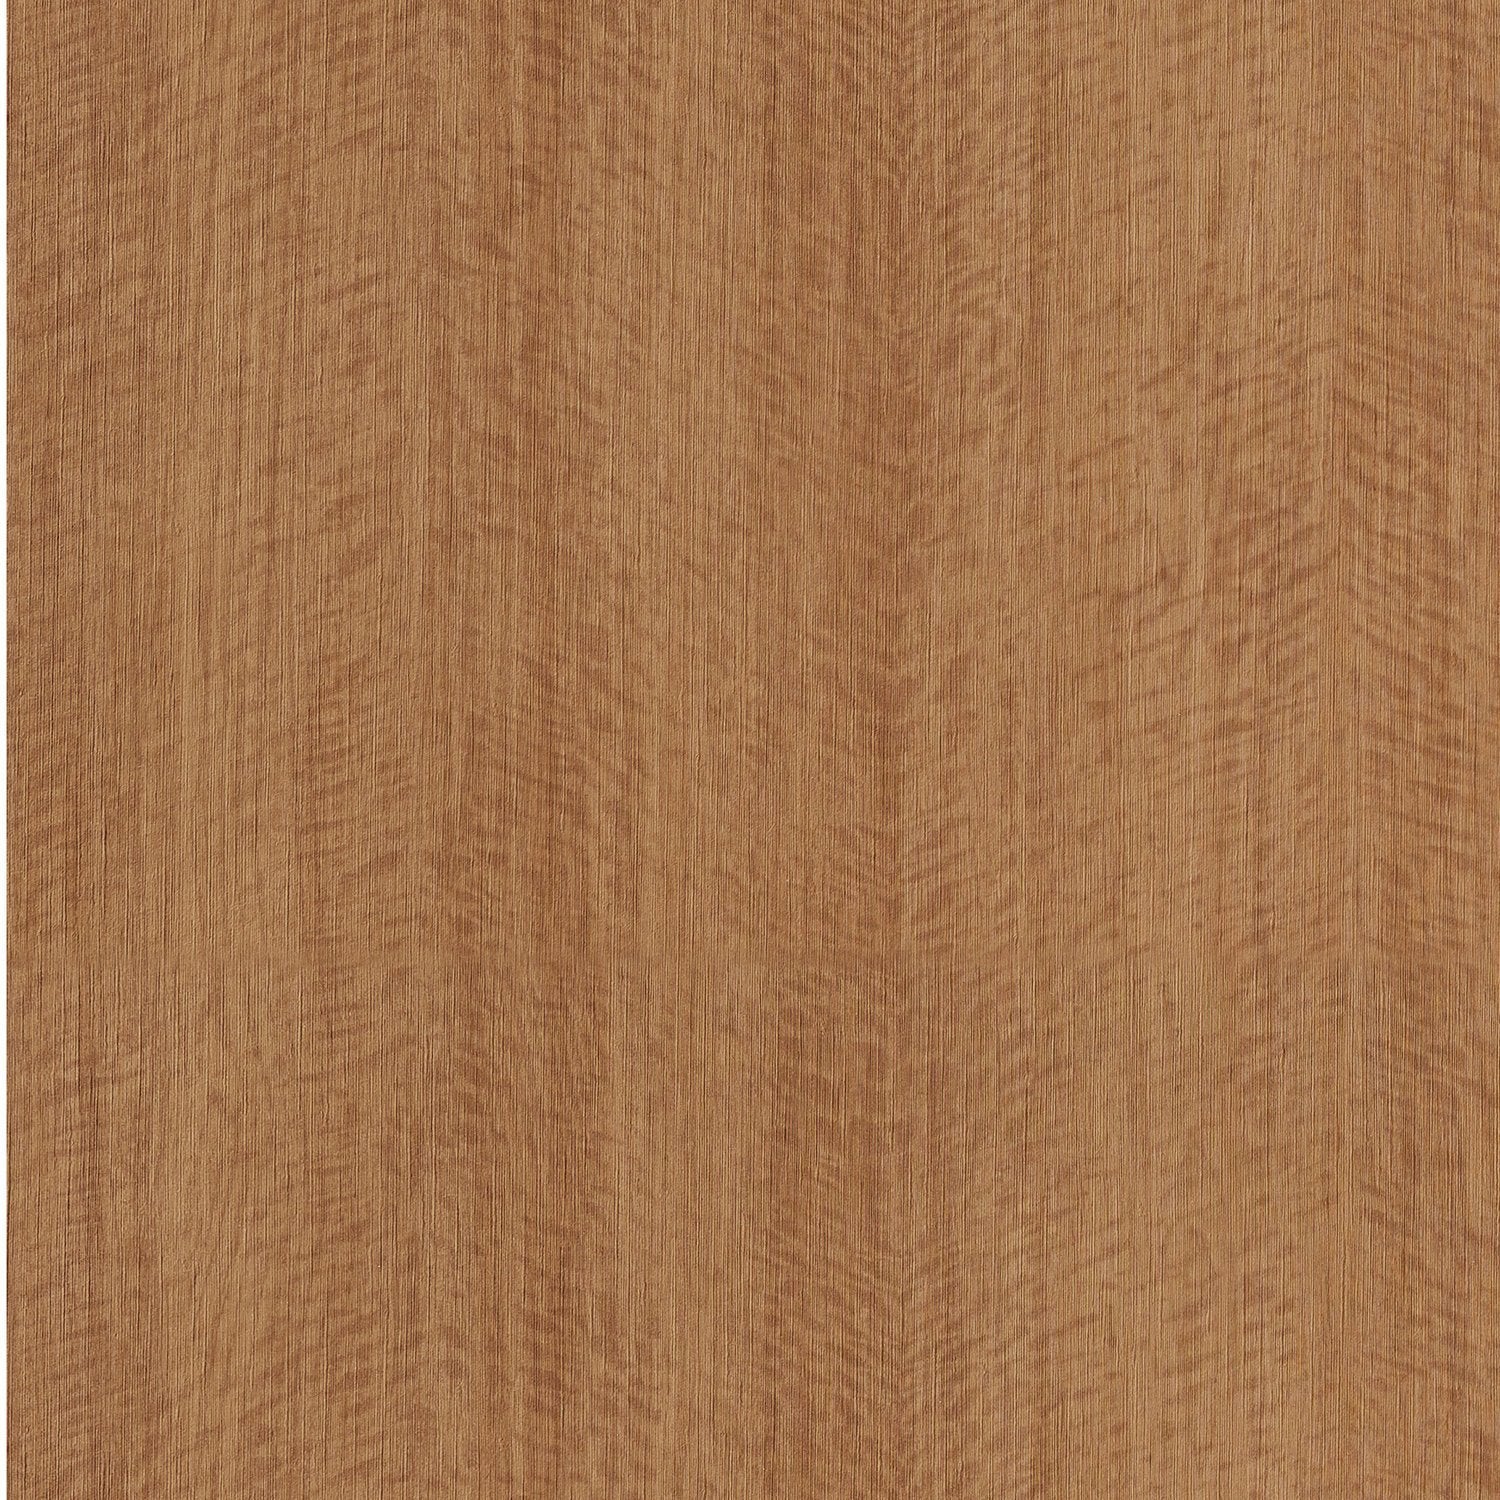 Woodn't It Be Nice - Y47884 - Wallcovering - Vycon - Kube Contract